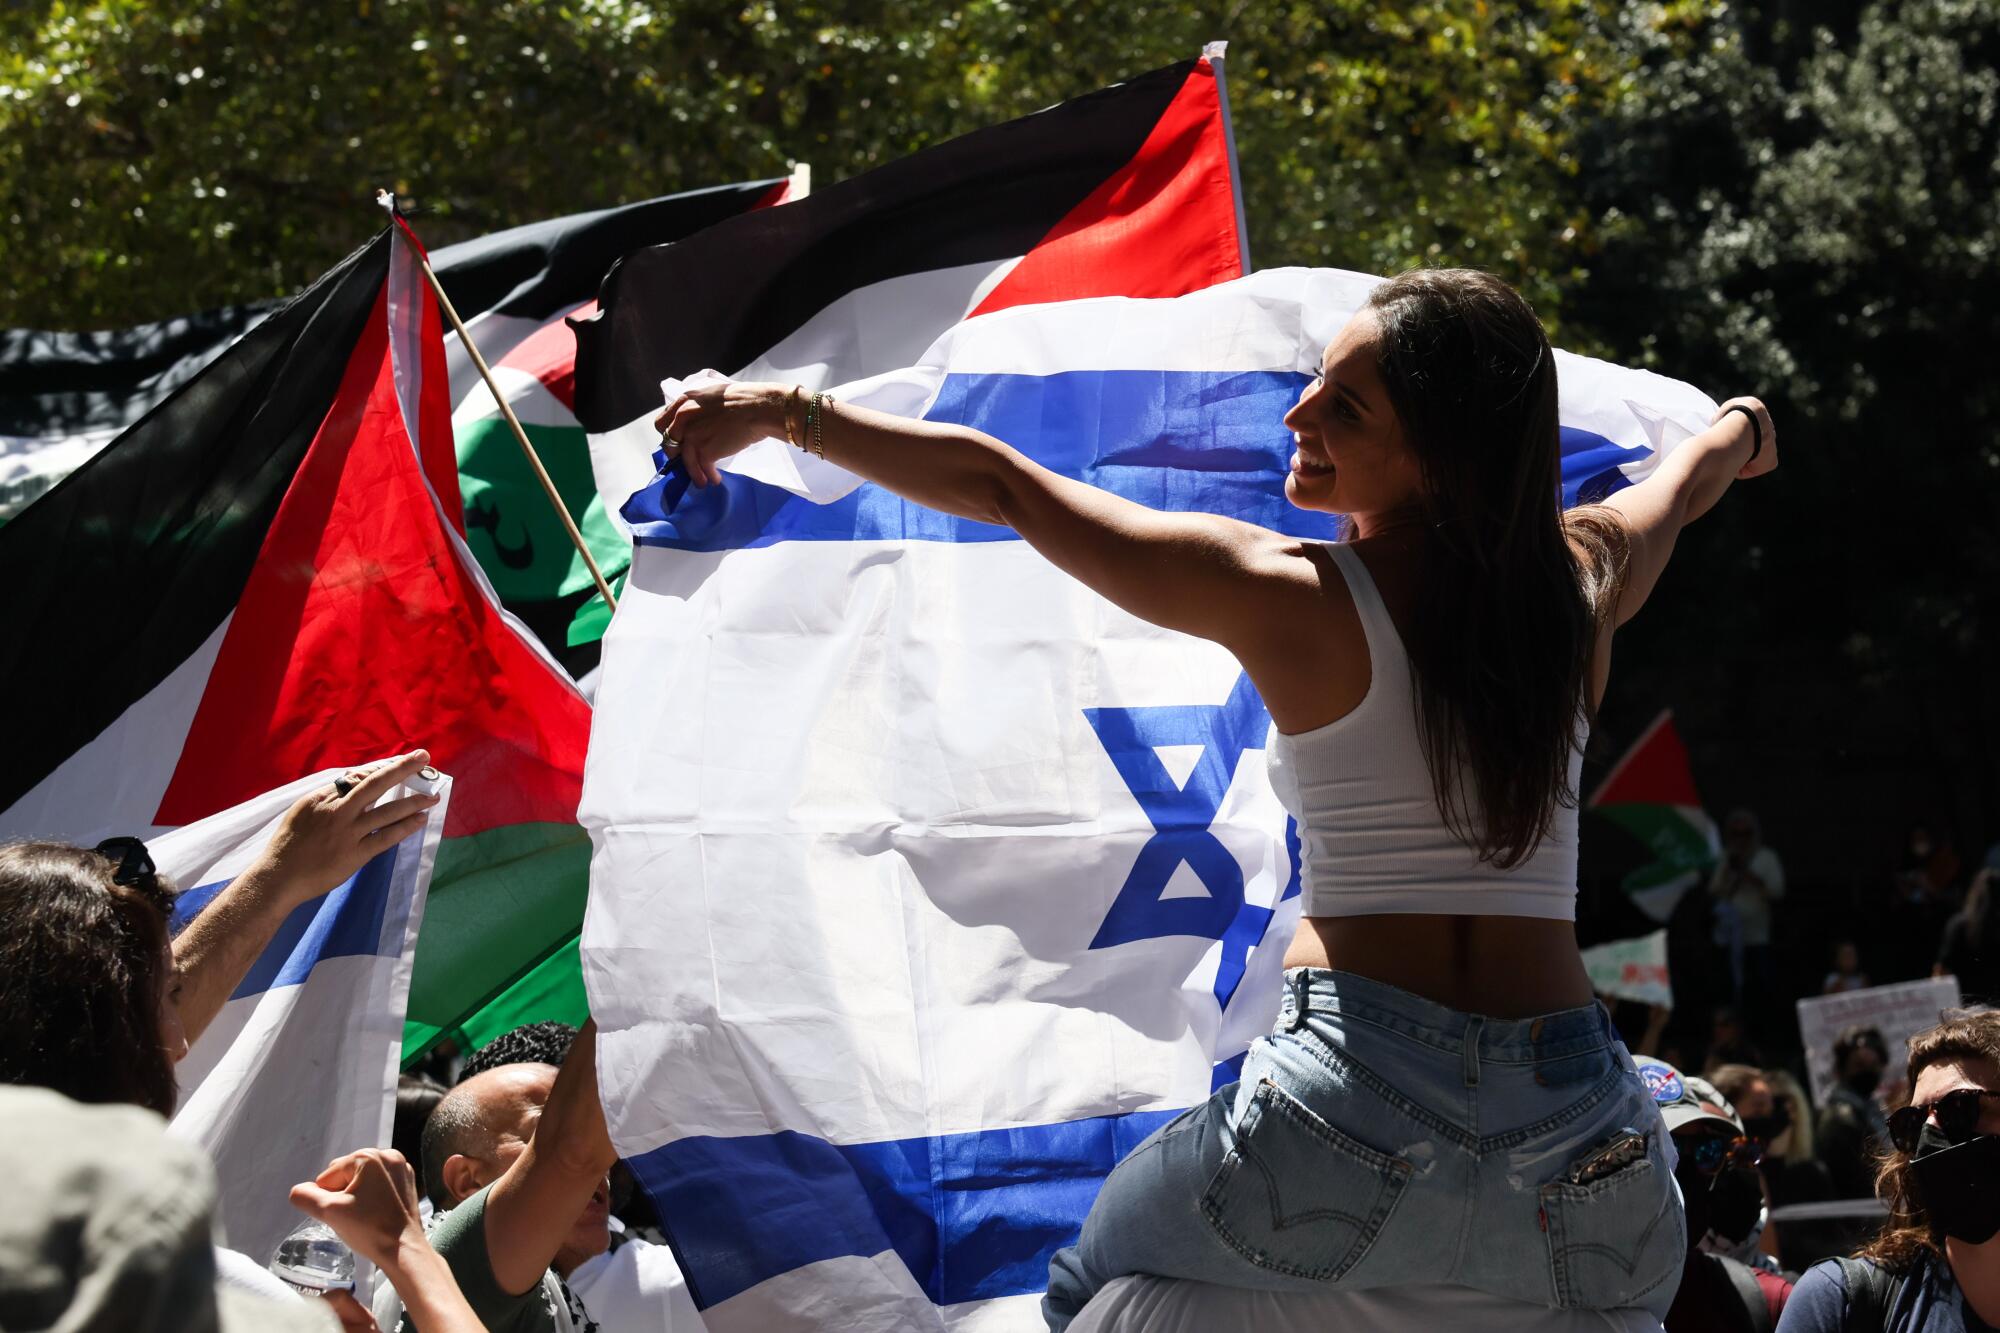 A protestor in support of Israel waves an Israeli flag while surrounded by pro-Palestinian 